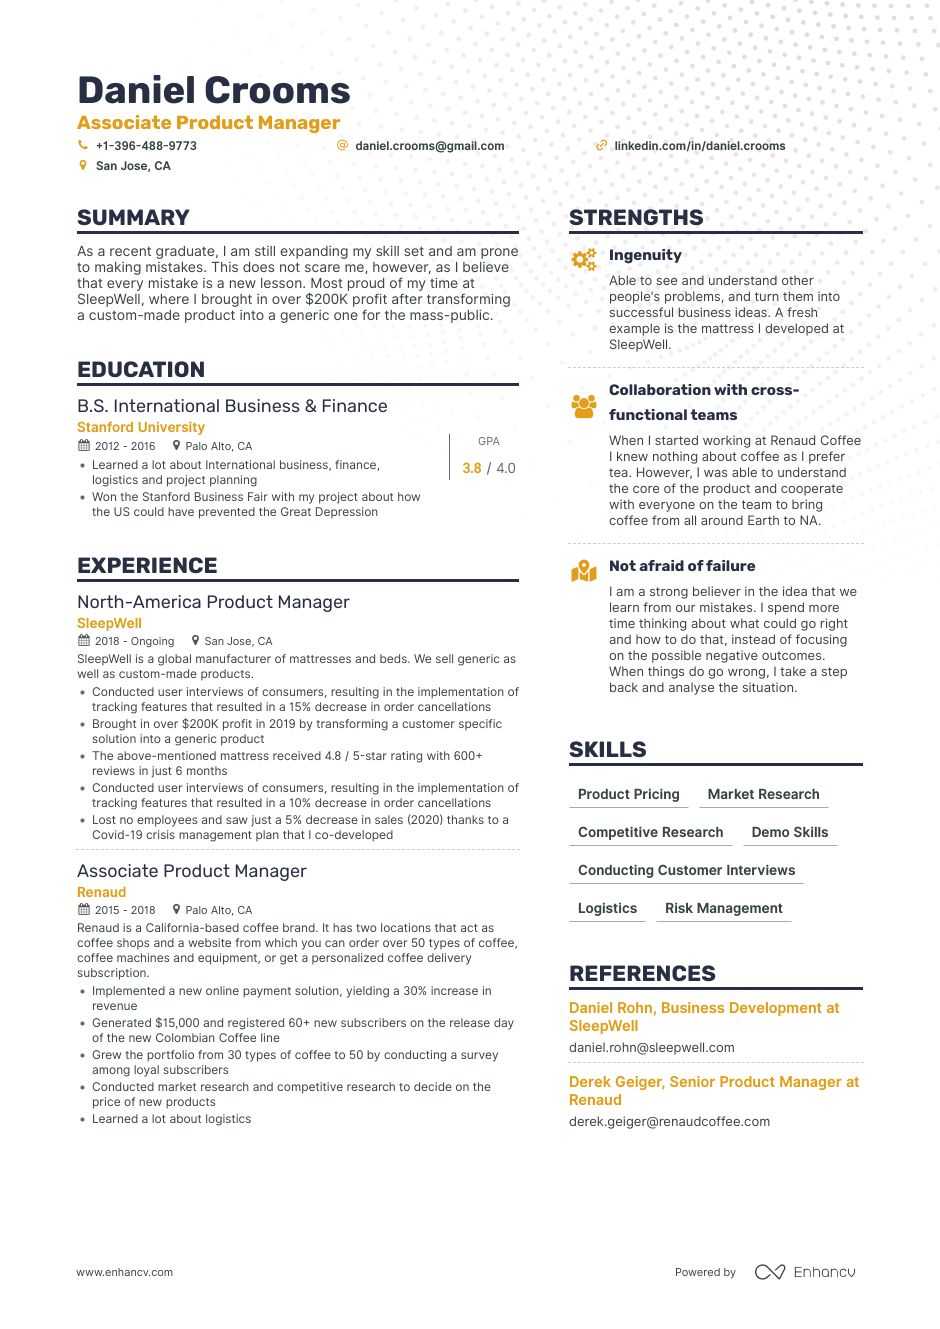 Product Manager Resume Examples & Guide for 20 Layout, Skills ...